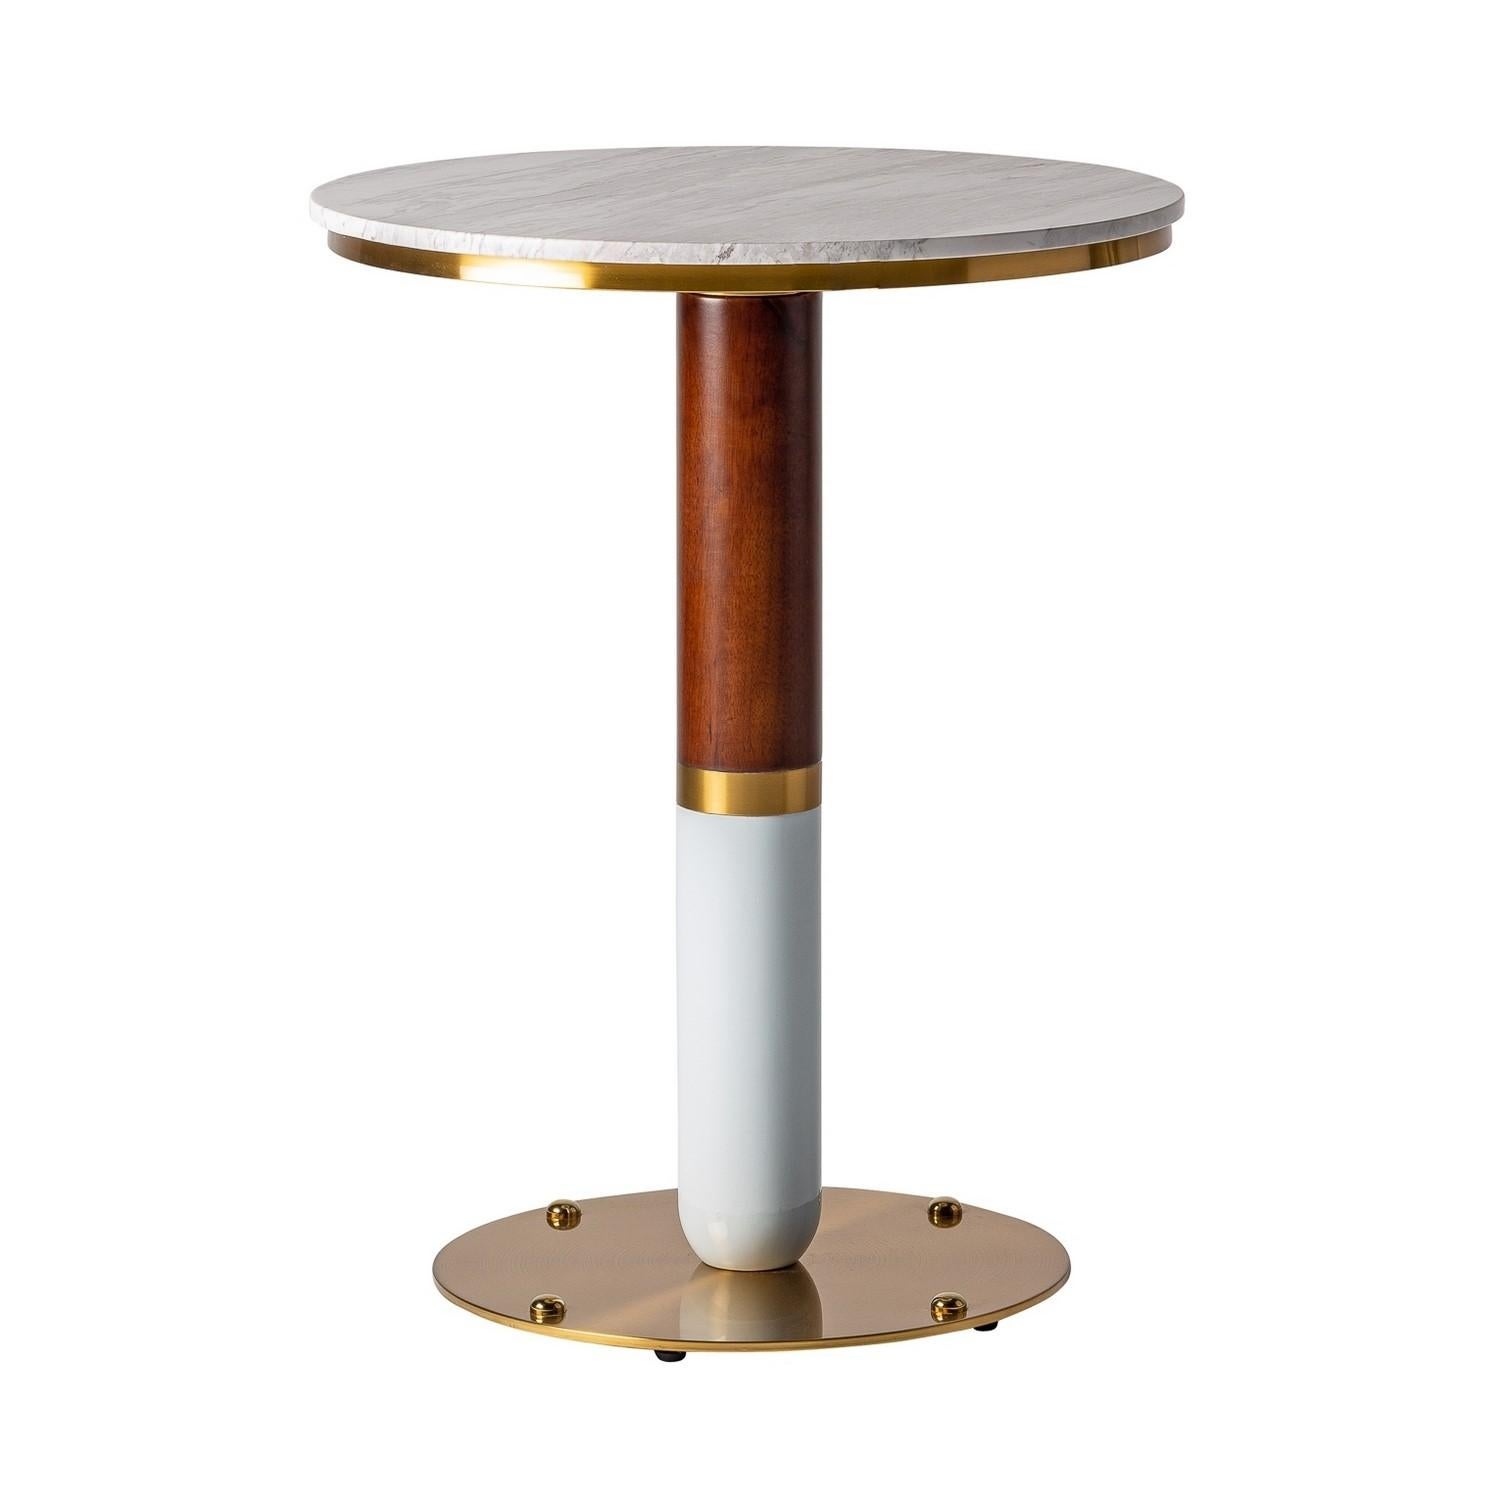 Unknown Art Deco Style Round White Marble and Walnut Wooden Pedestal Table